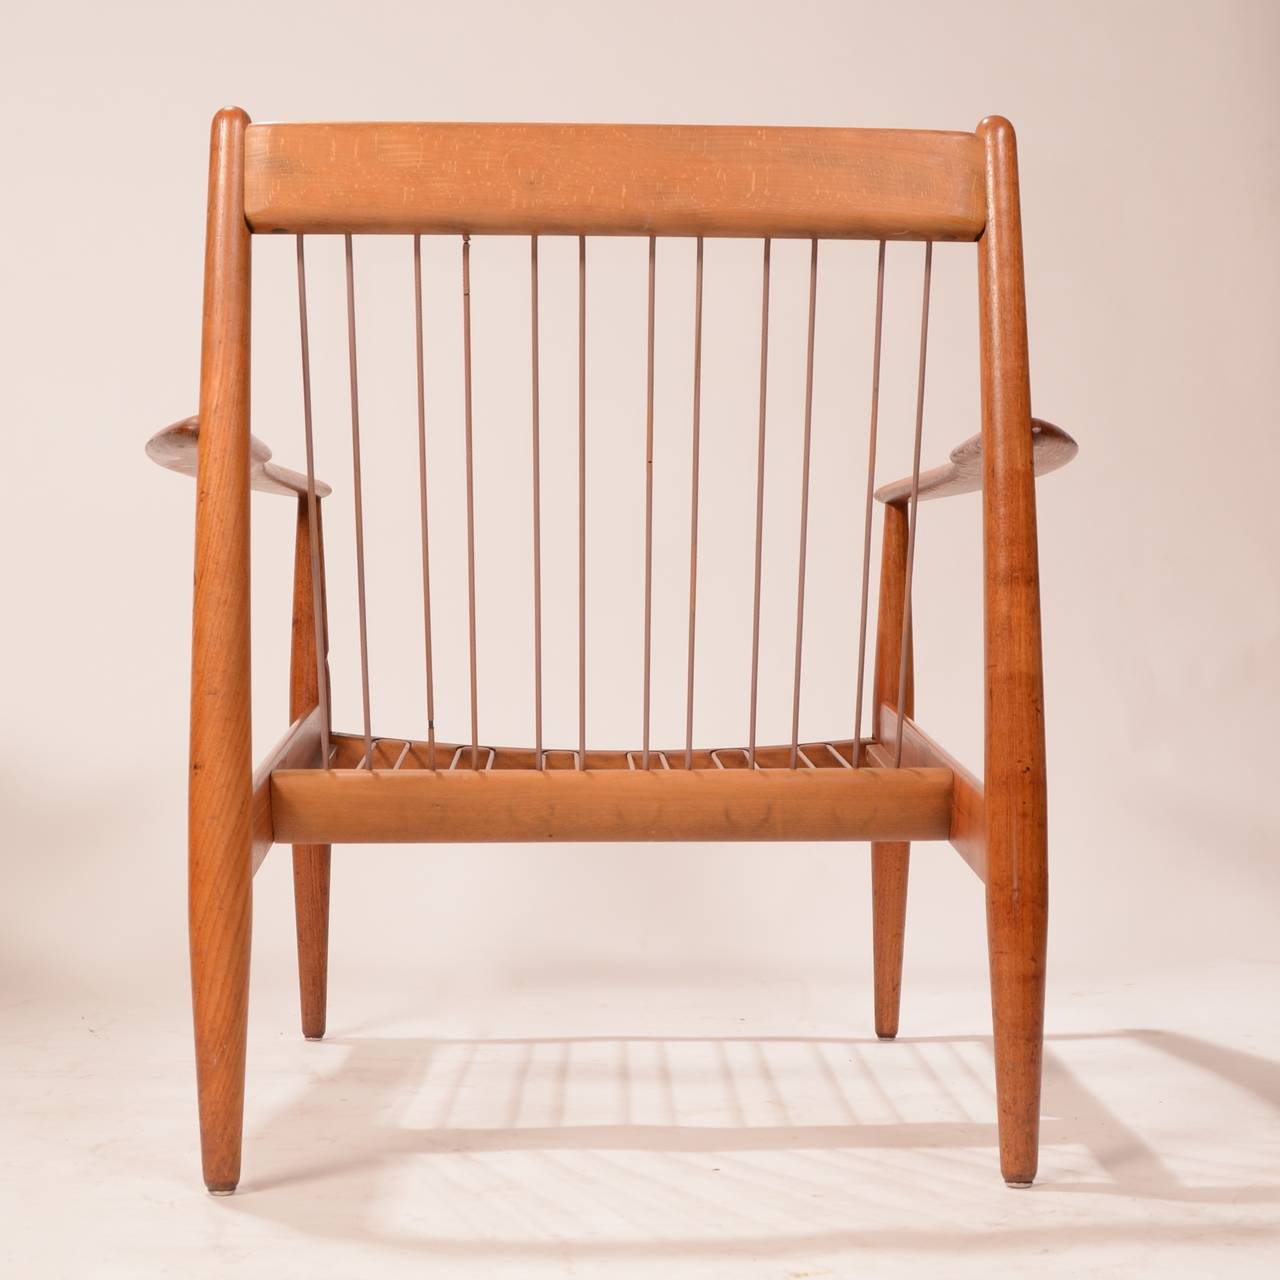 Early Grete Jalk Teak Lounge Chairs with Banding Backs and Seats 1